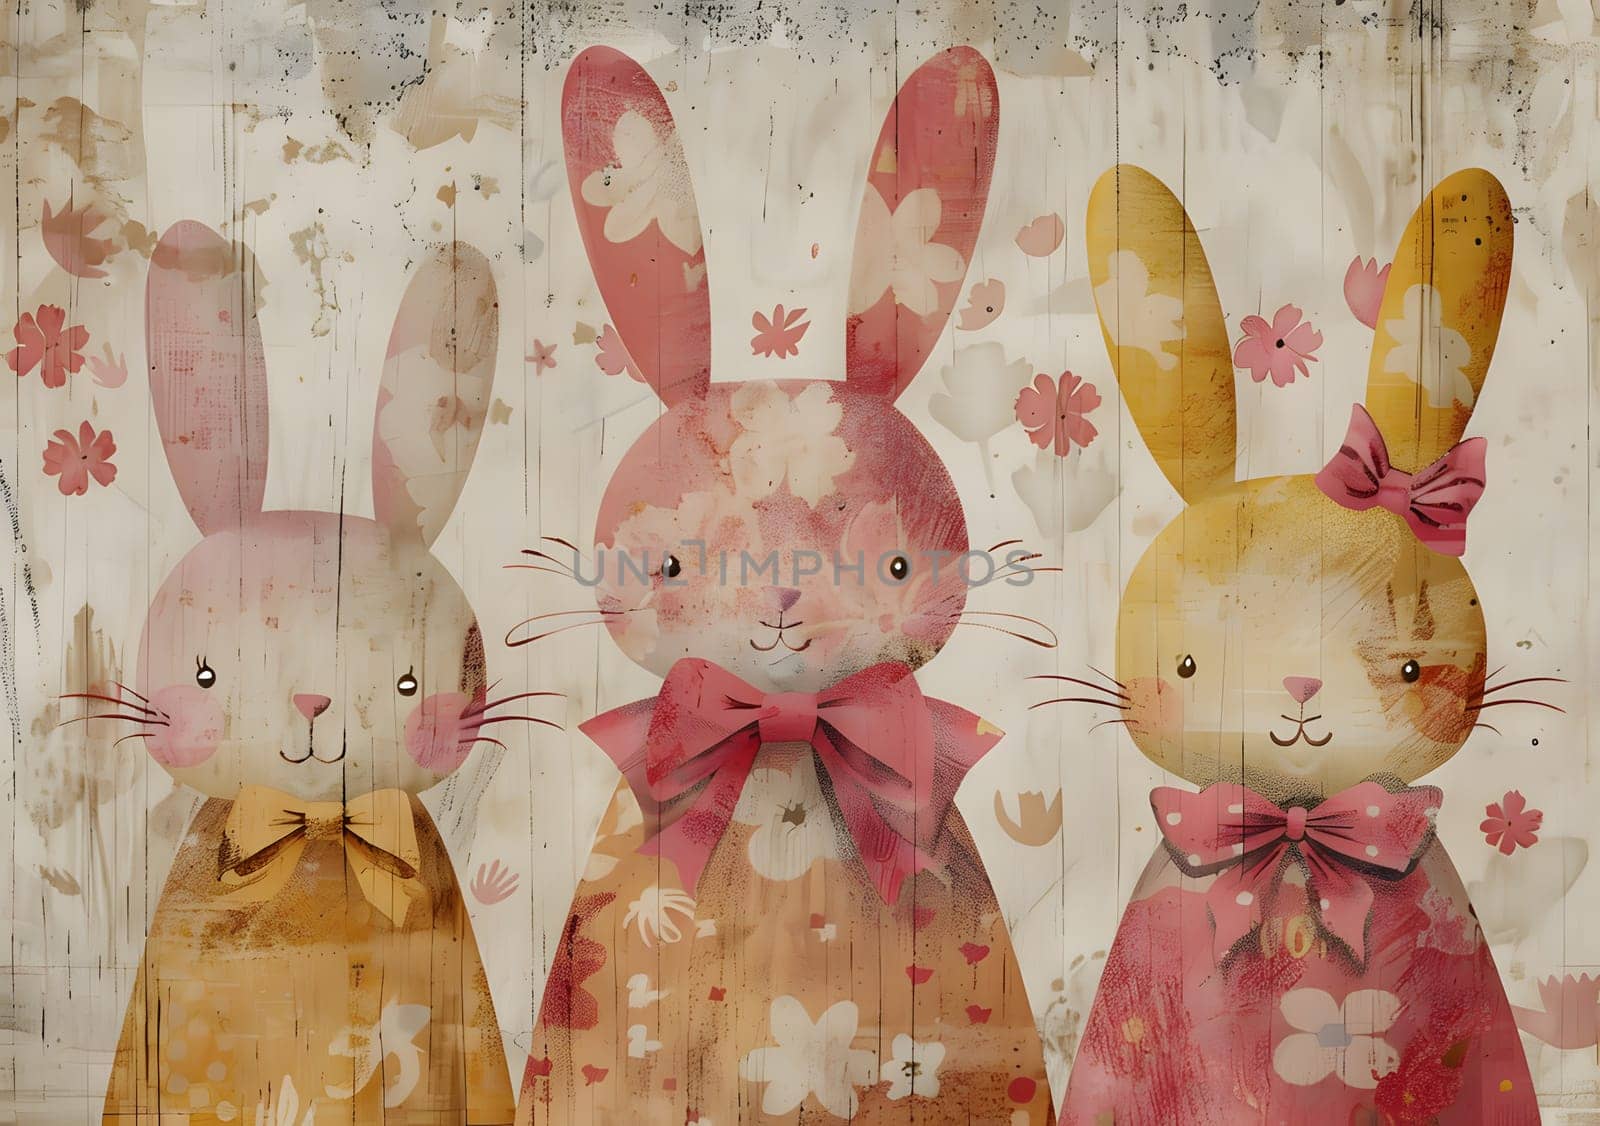 three rabbits with bows on their heads are standing next to each other by Nadtochiy